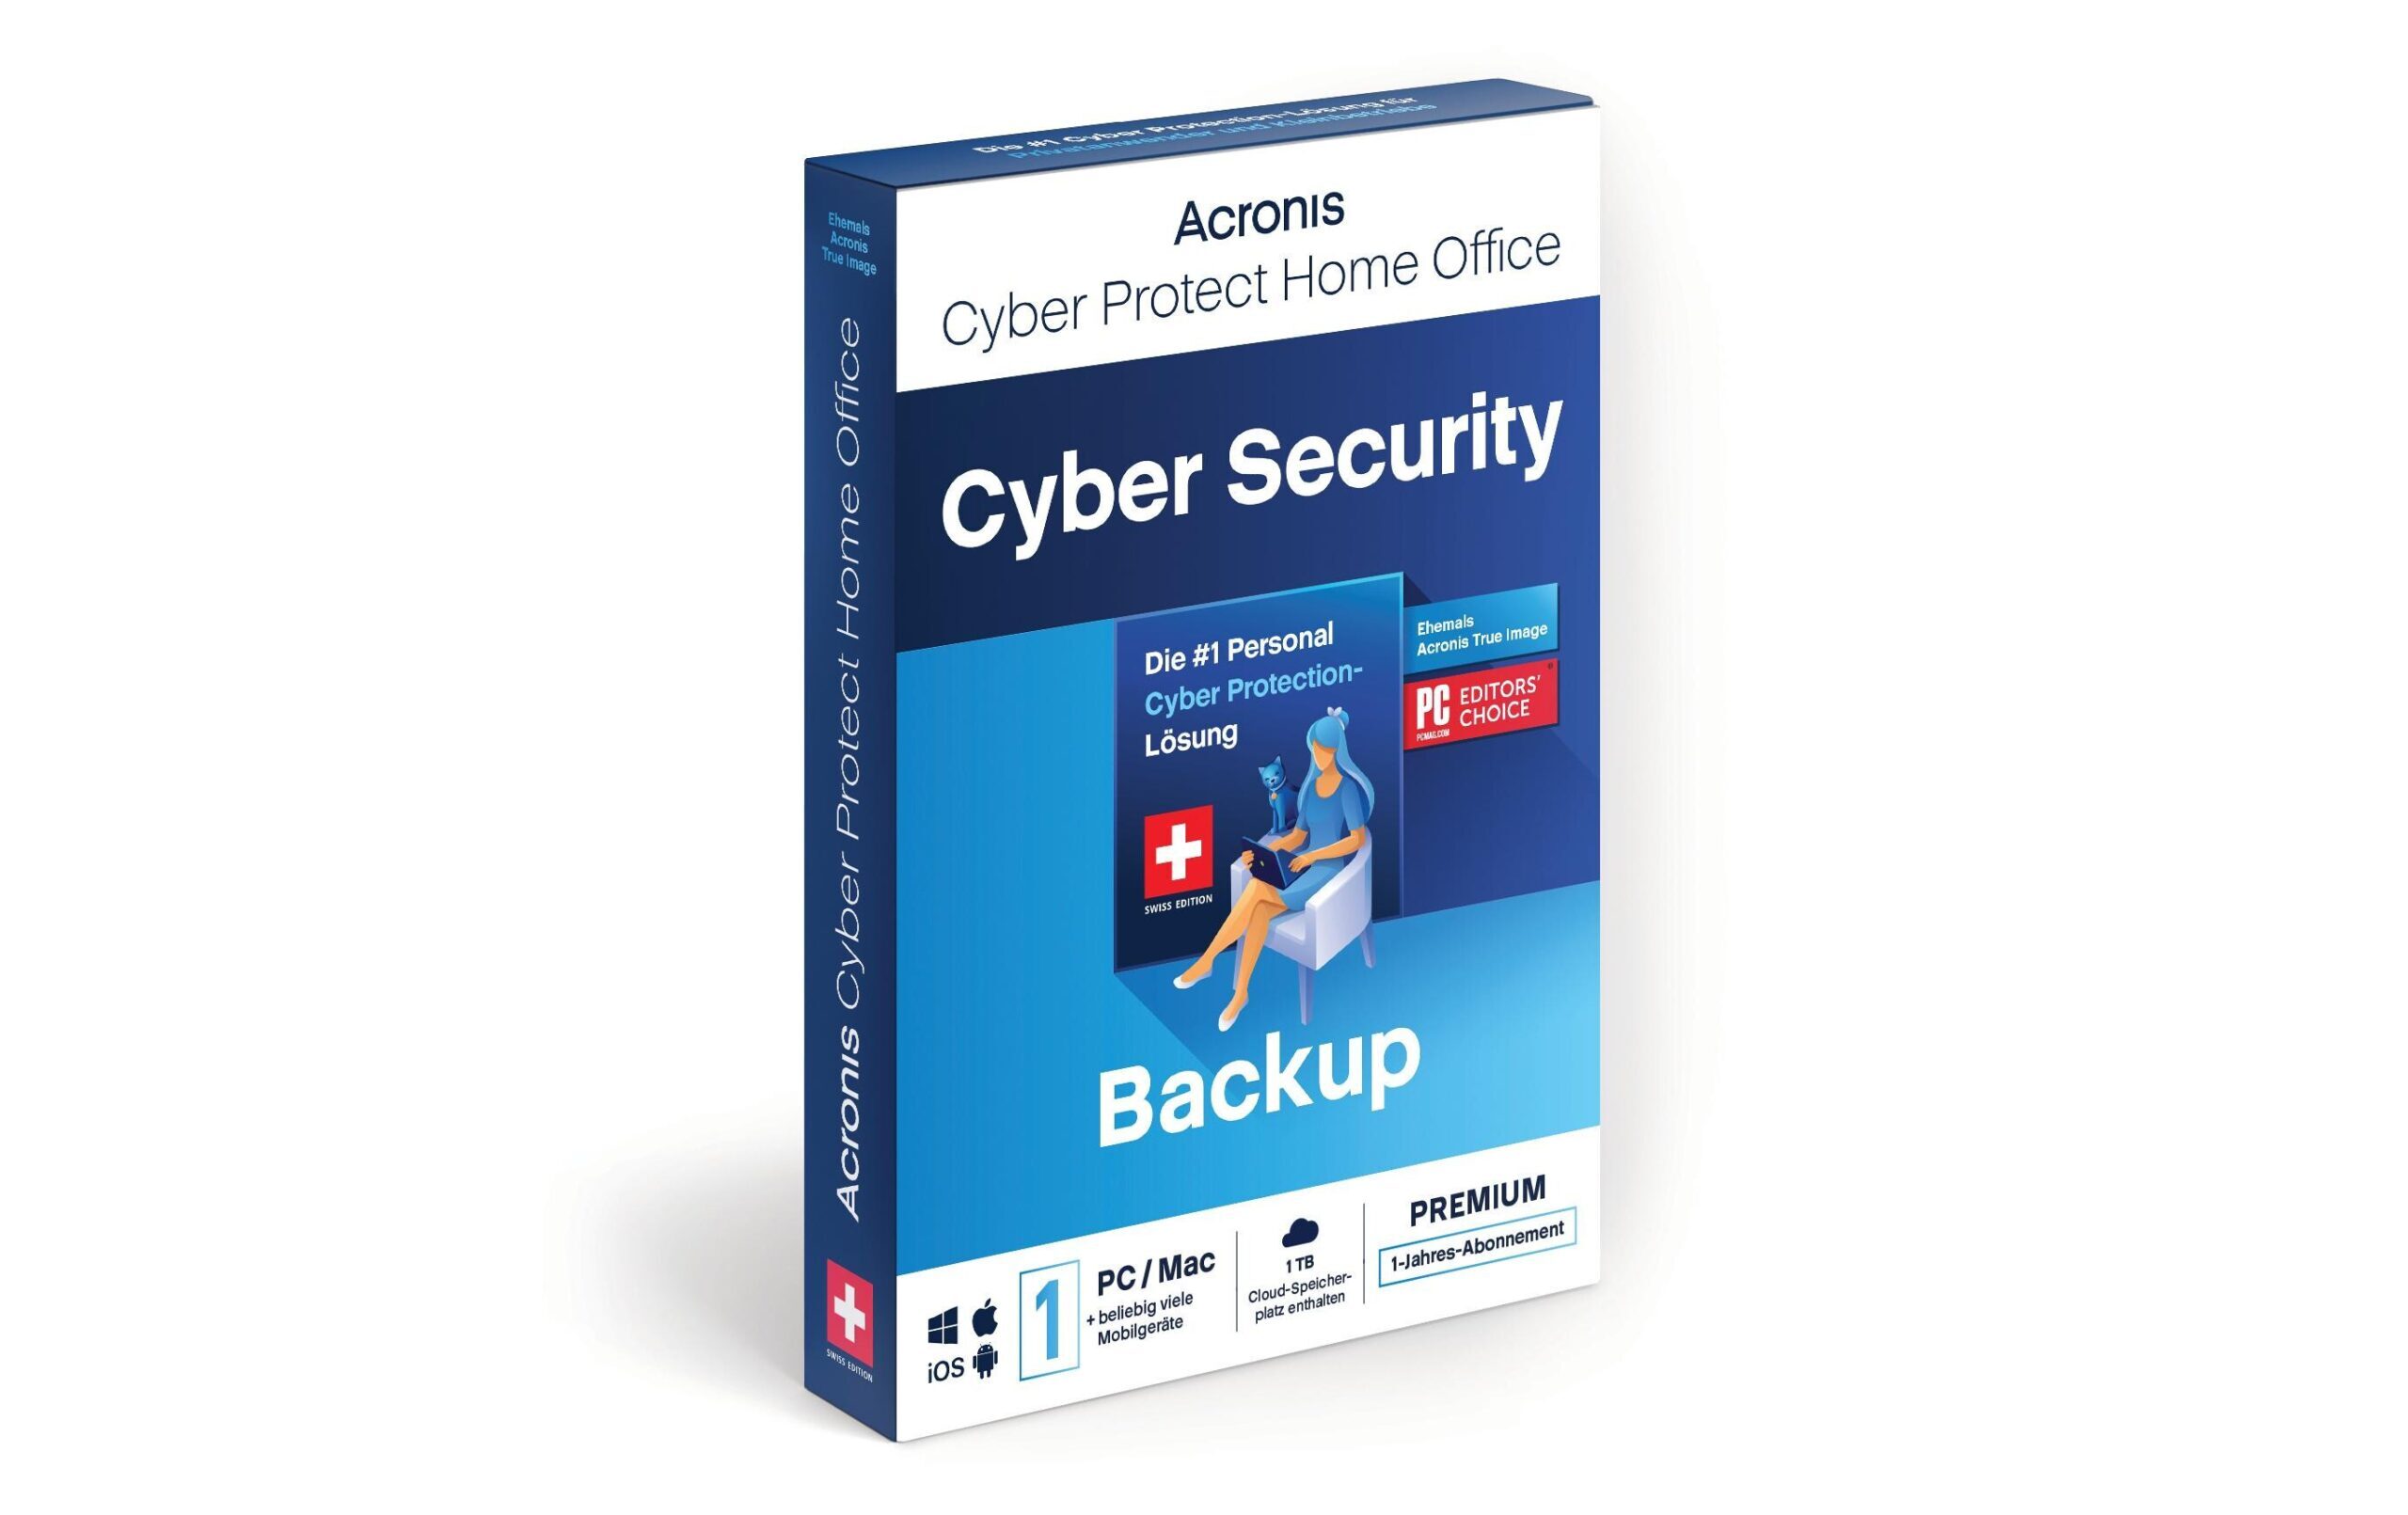 Acronis Cyber Protect Home Office – Premium 1TB